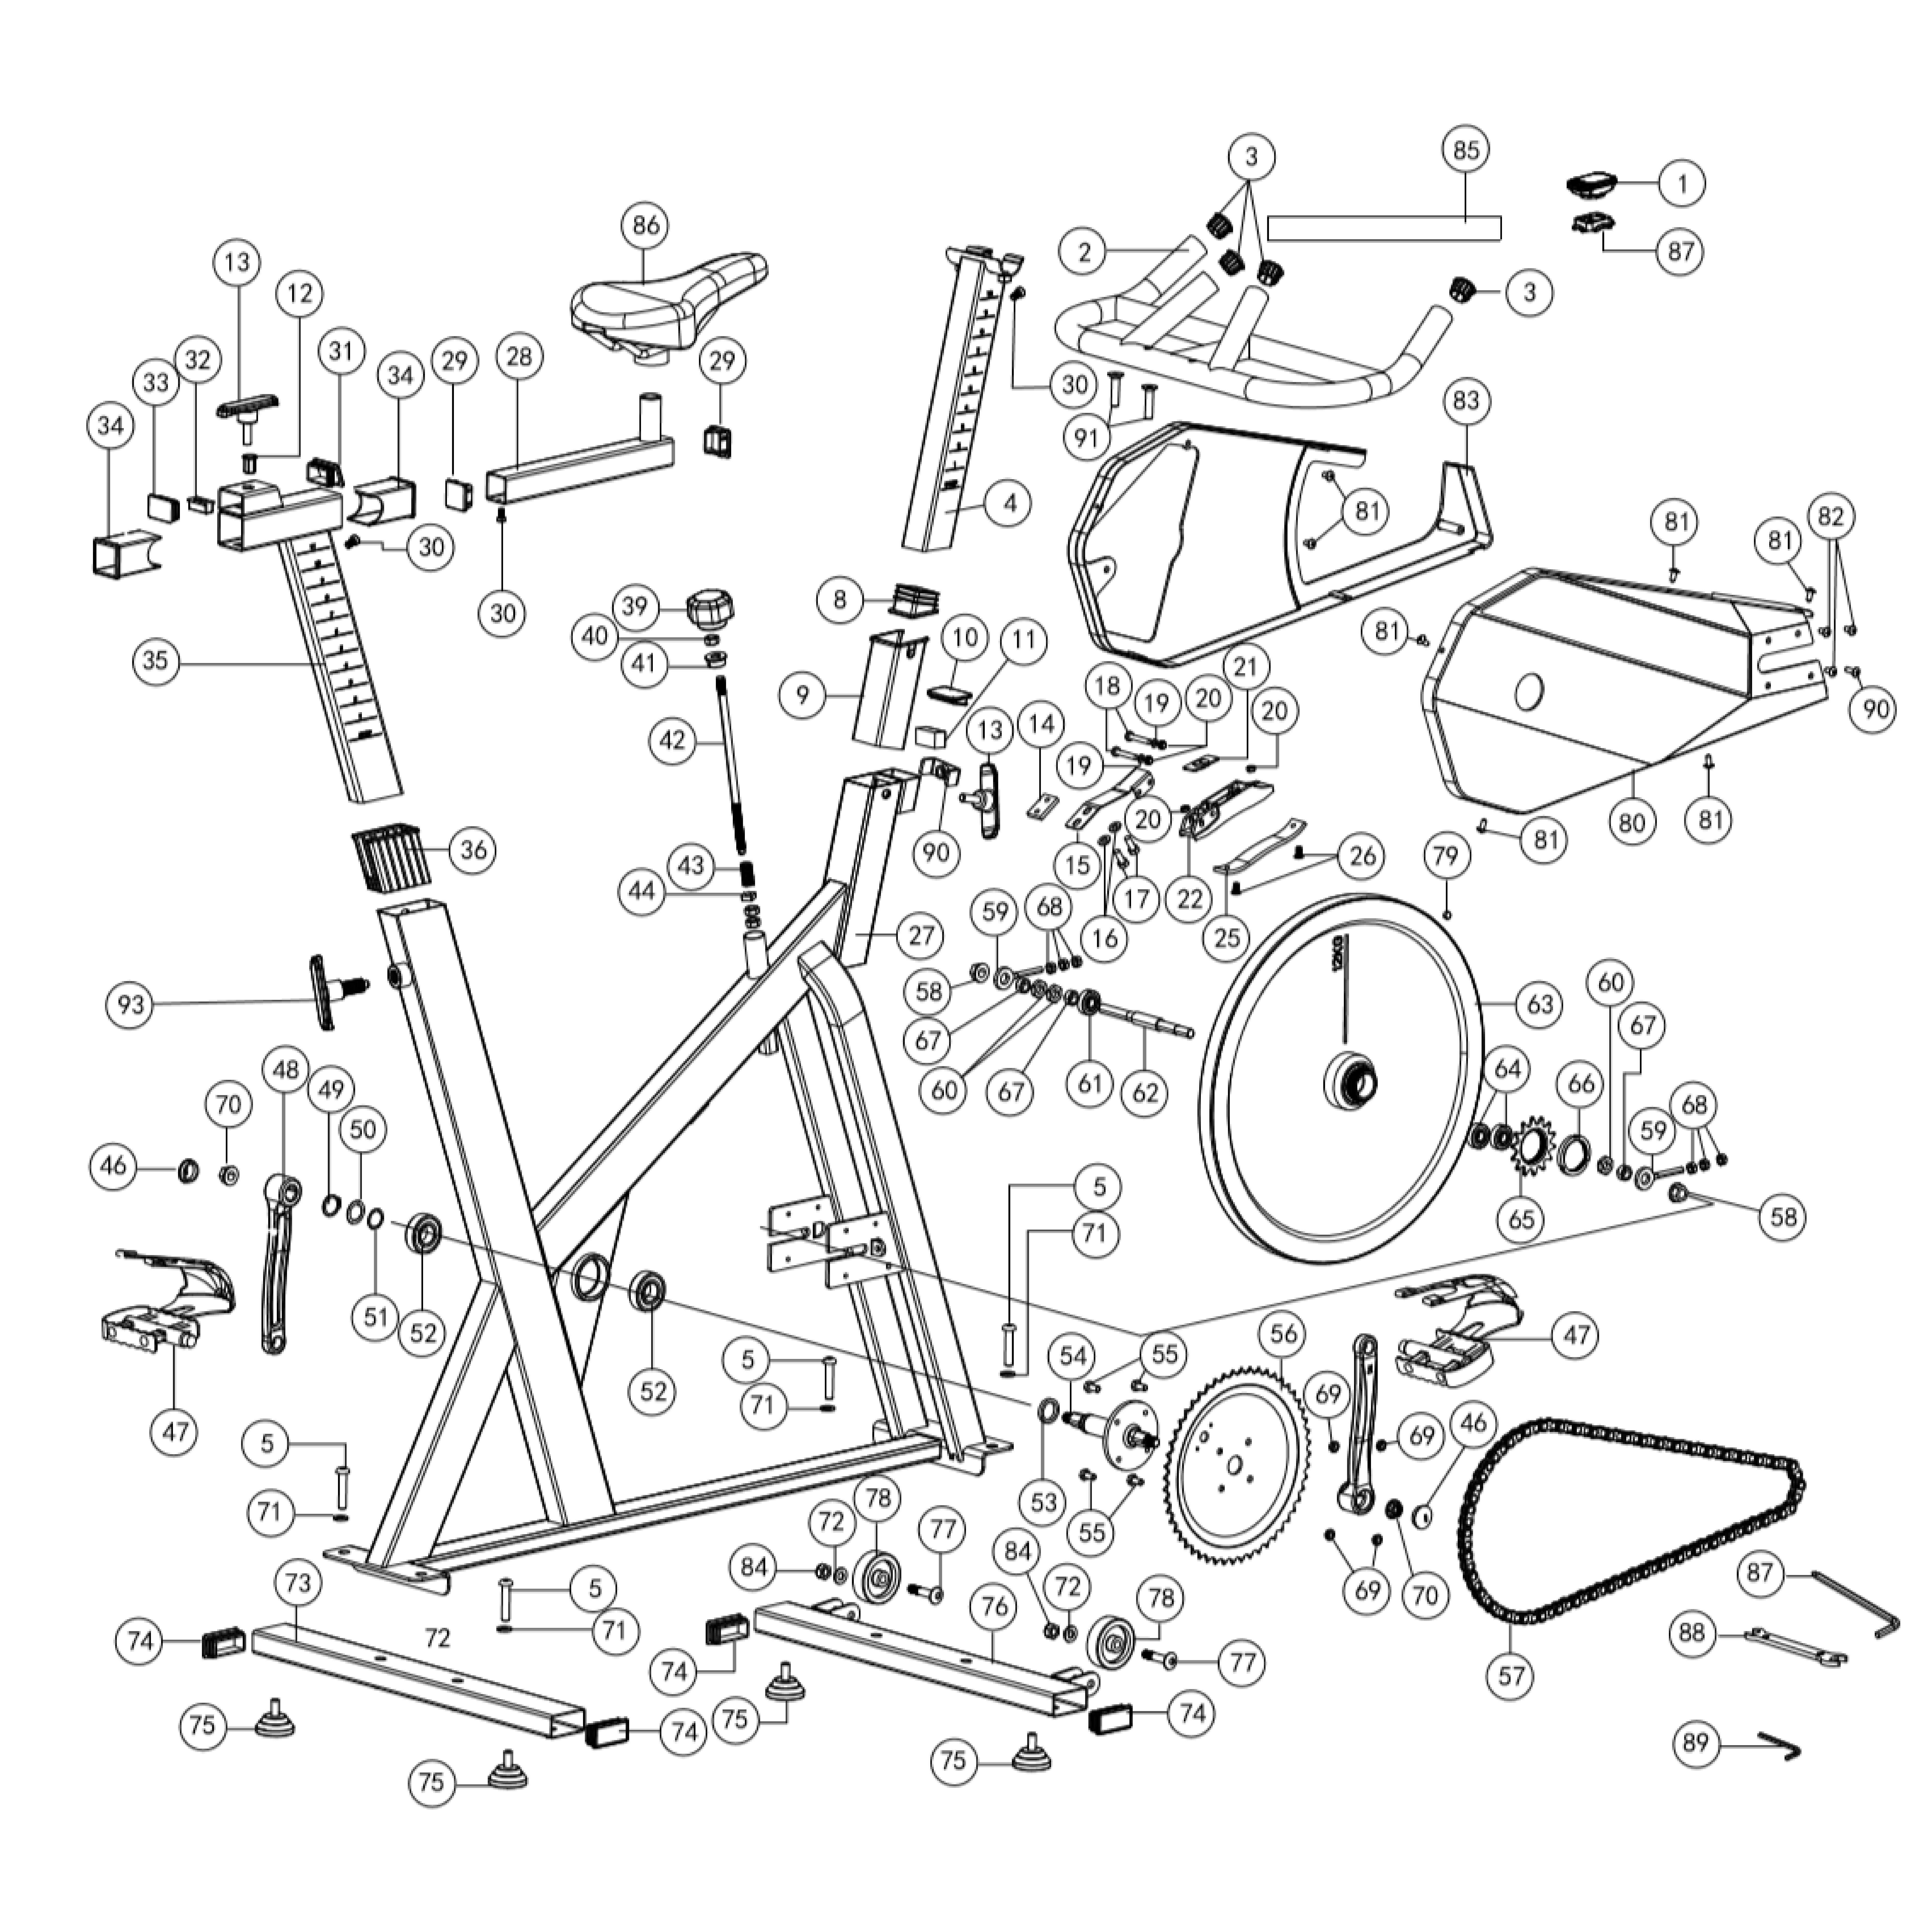 Biking100 Exploded view drawing